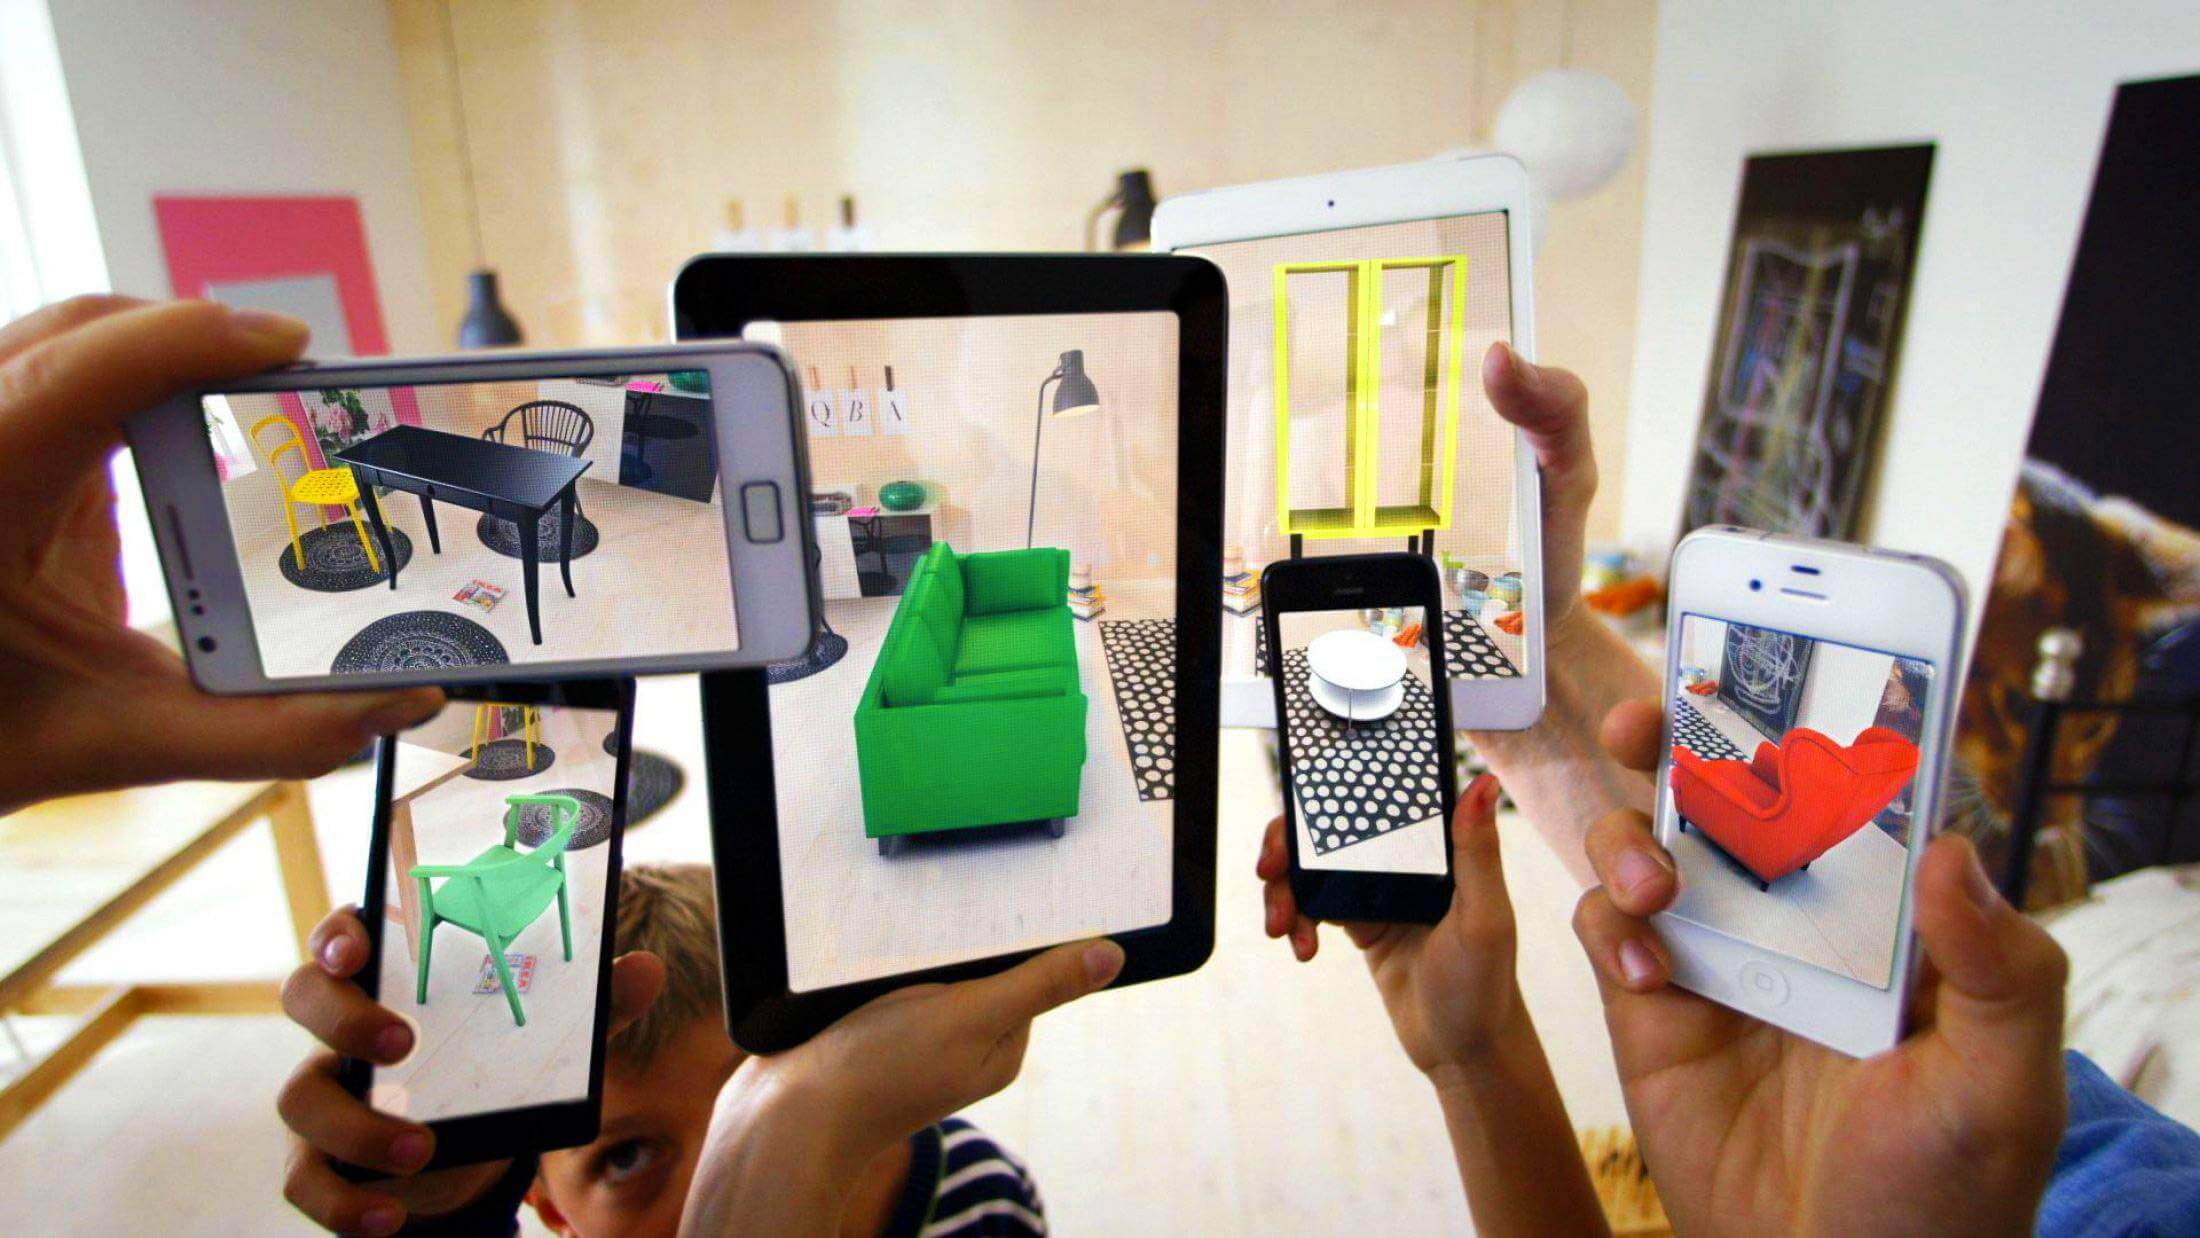 Mobile applications using augmented reality technologies